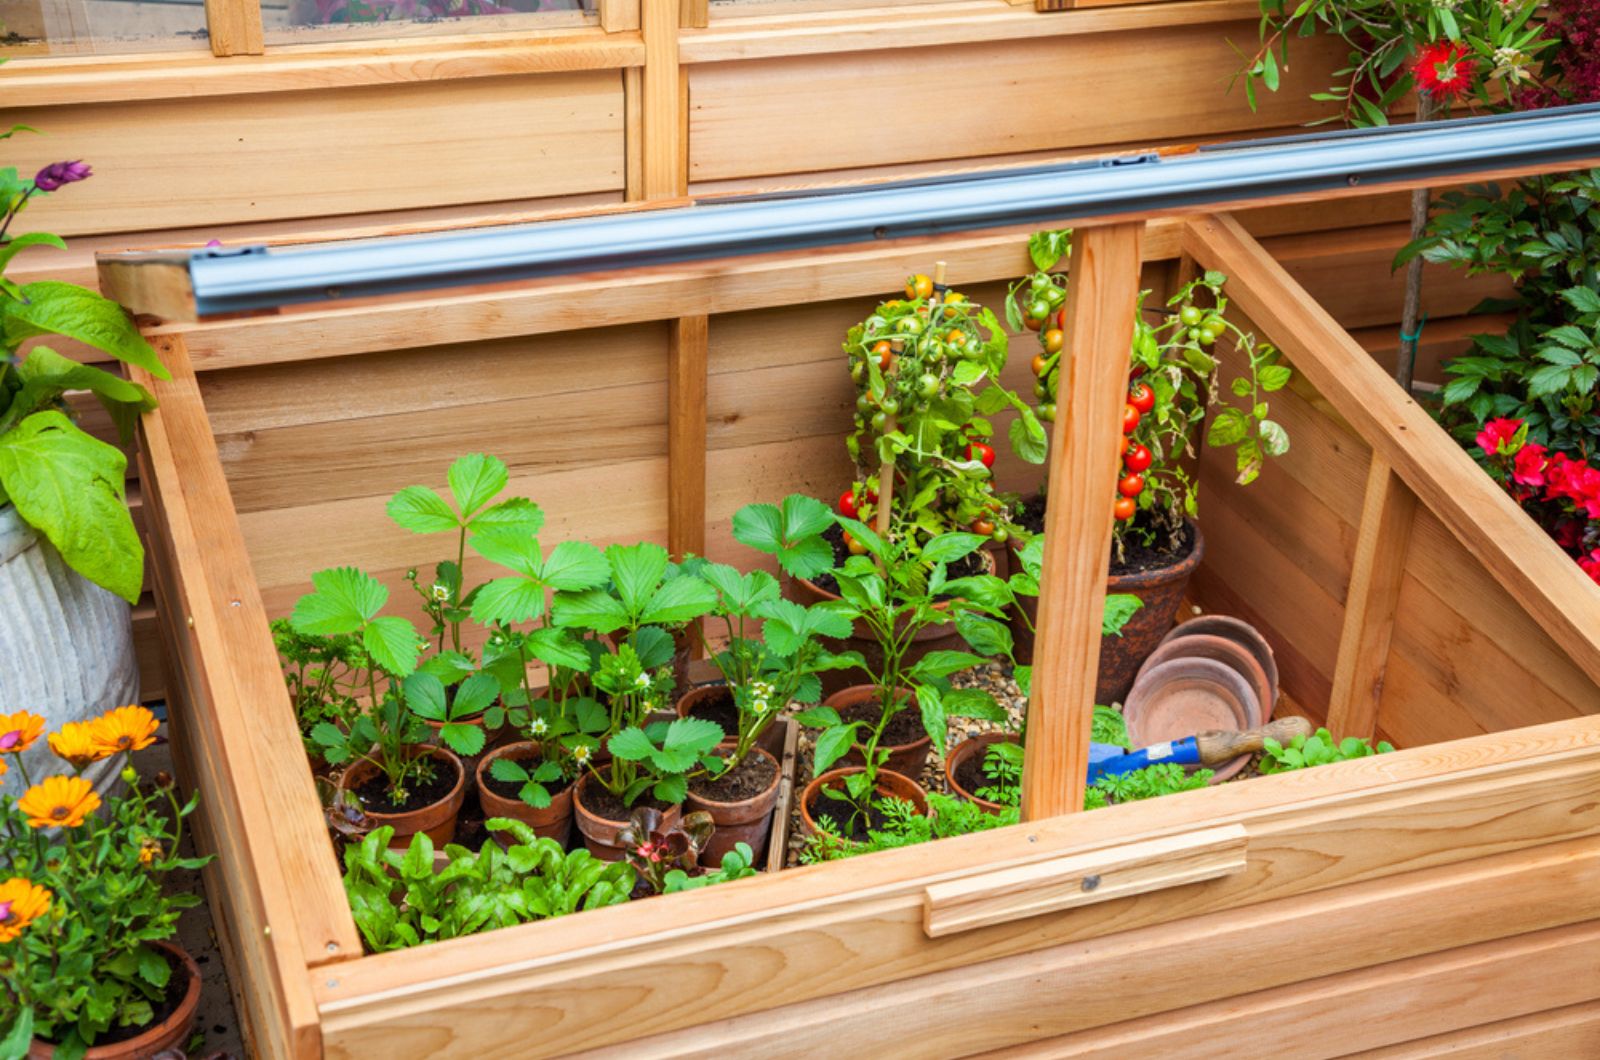 cold frame witg vegetables and herbs